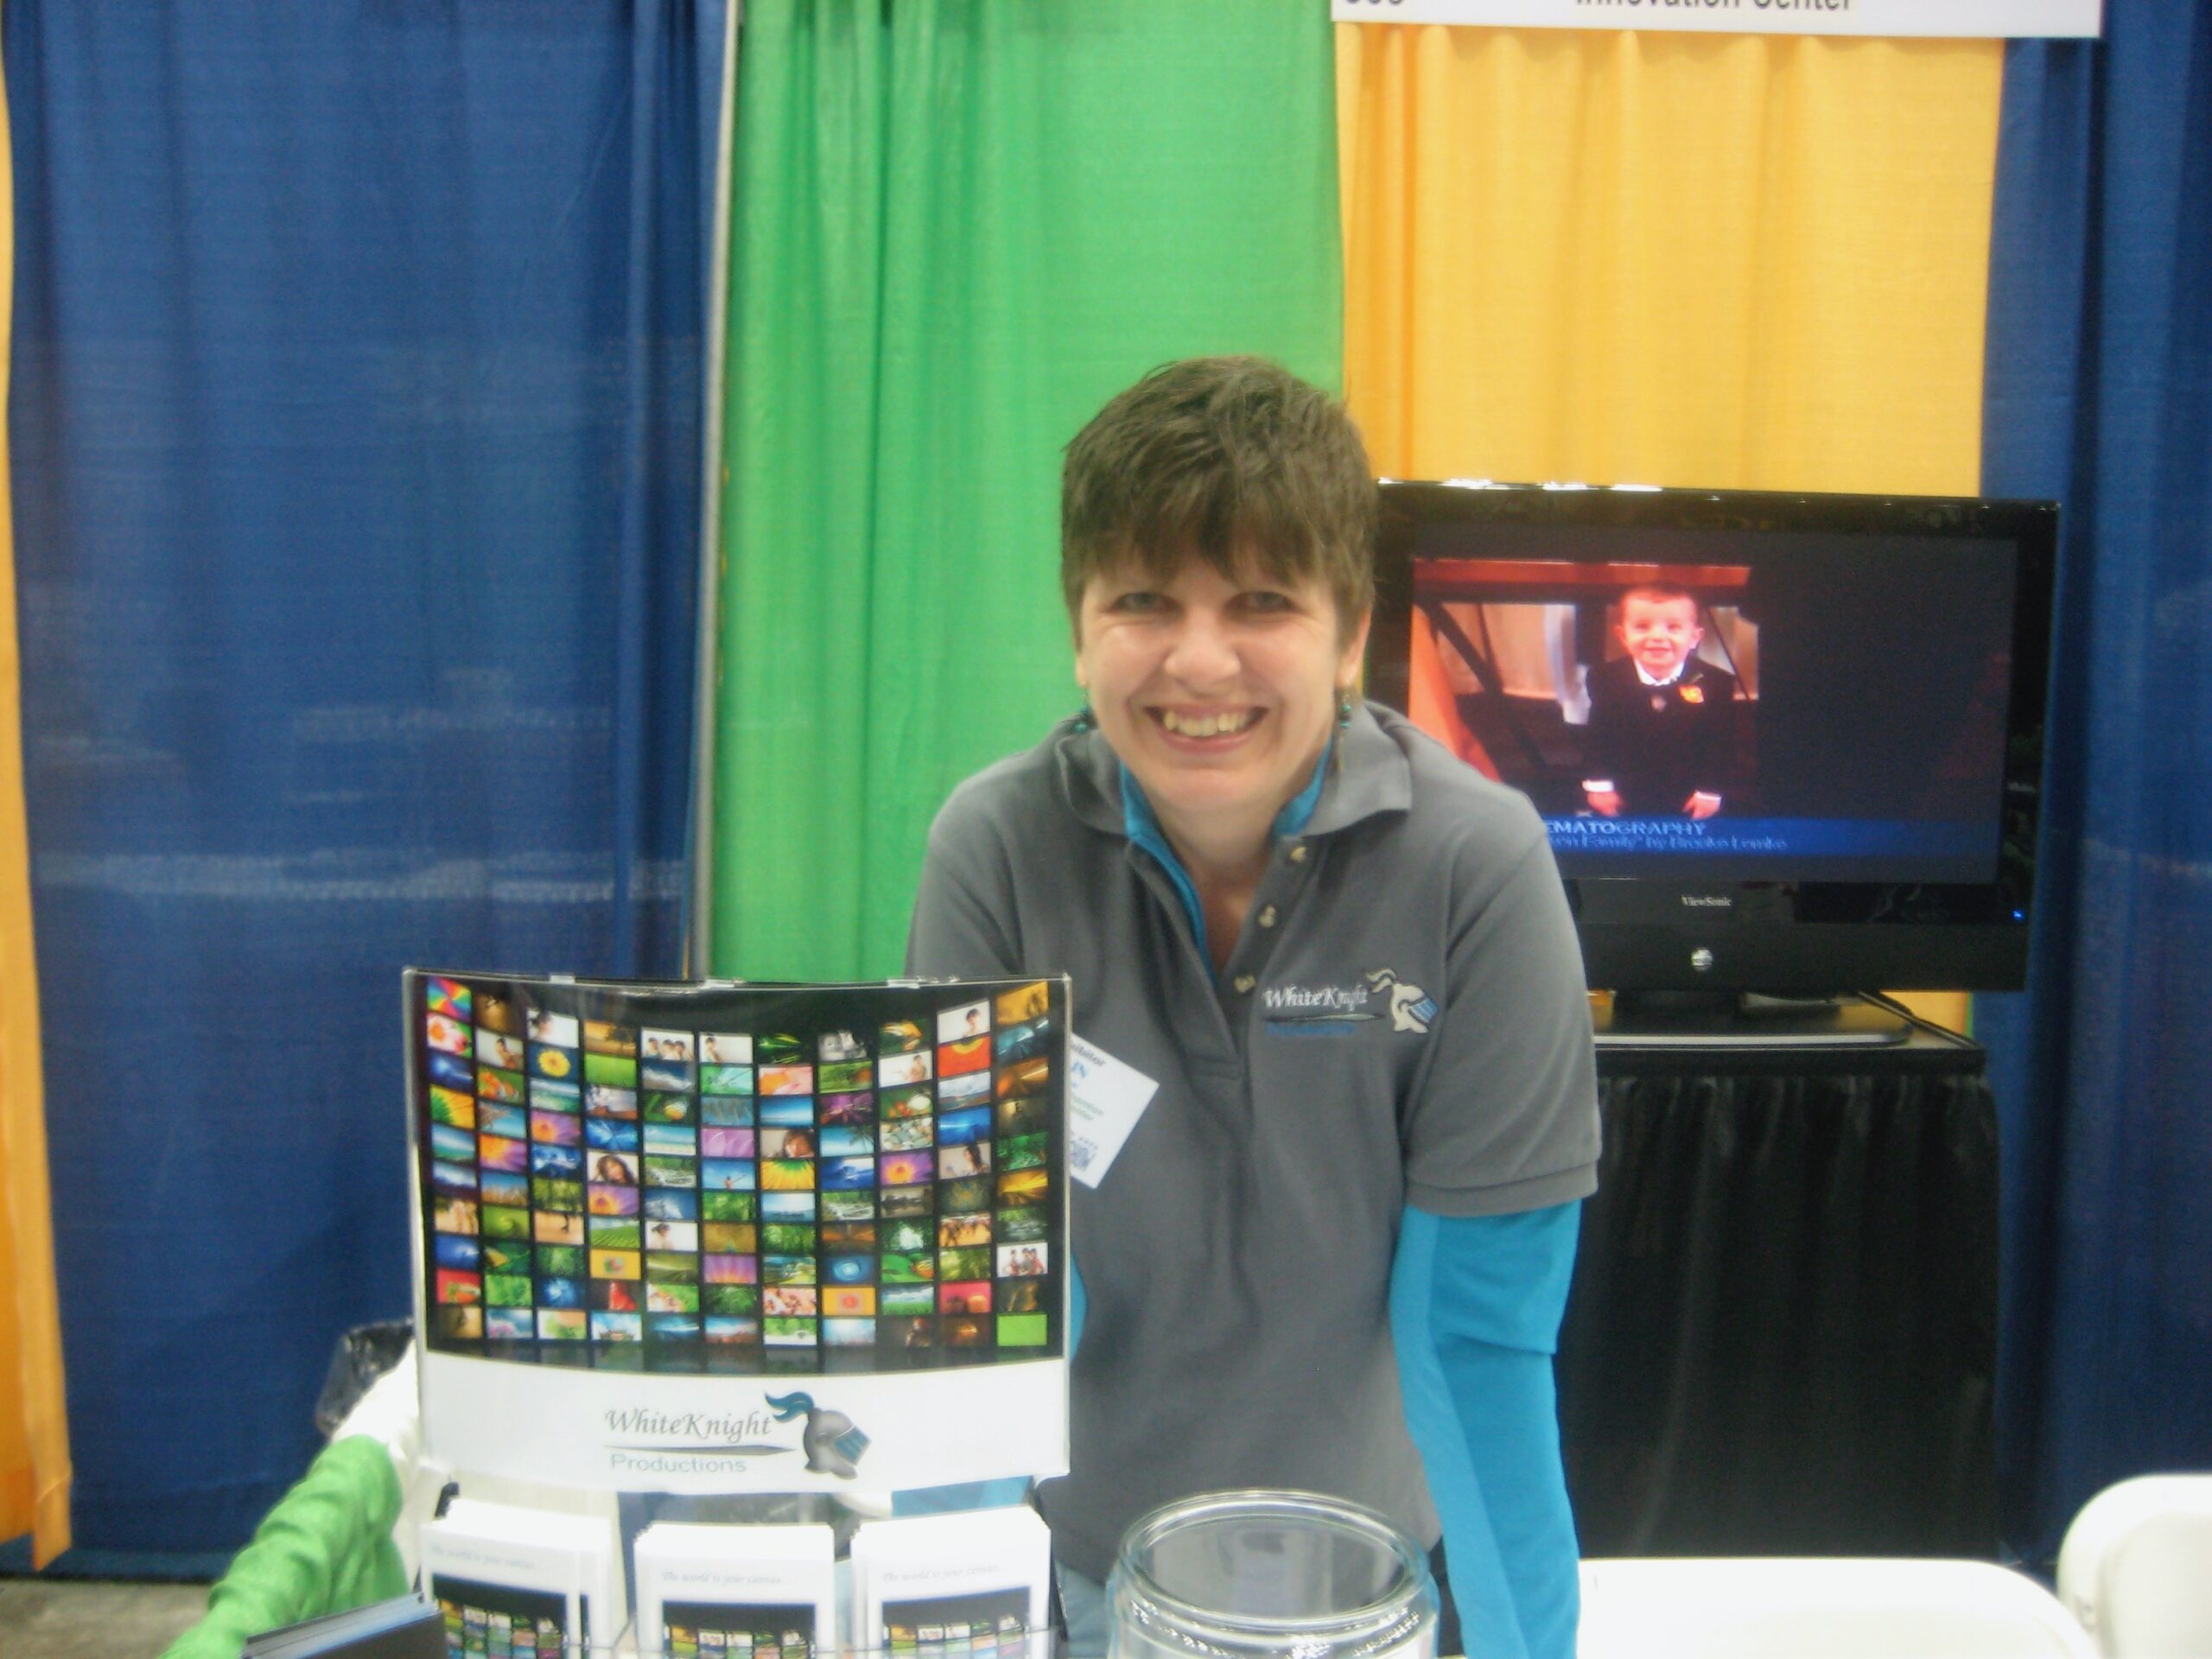 Elin Barton attending a trade show with a booth for White Knight Productions.